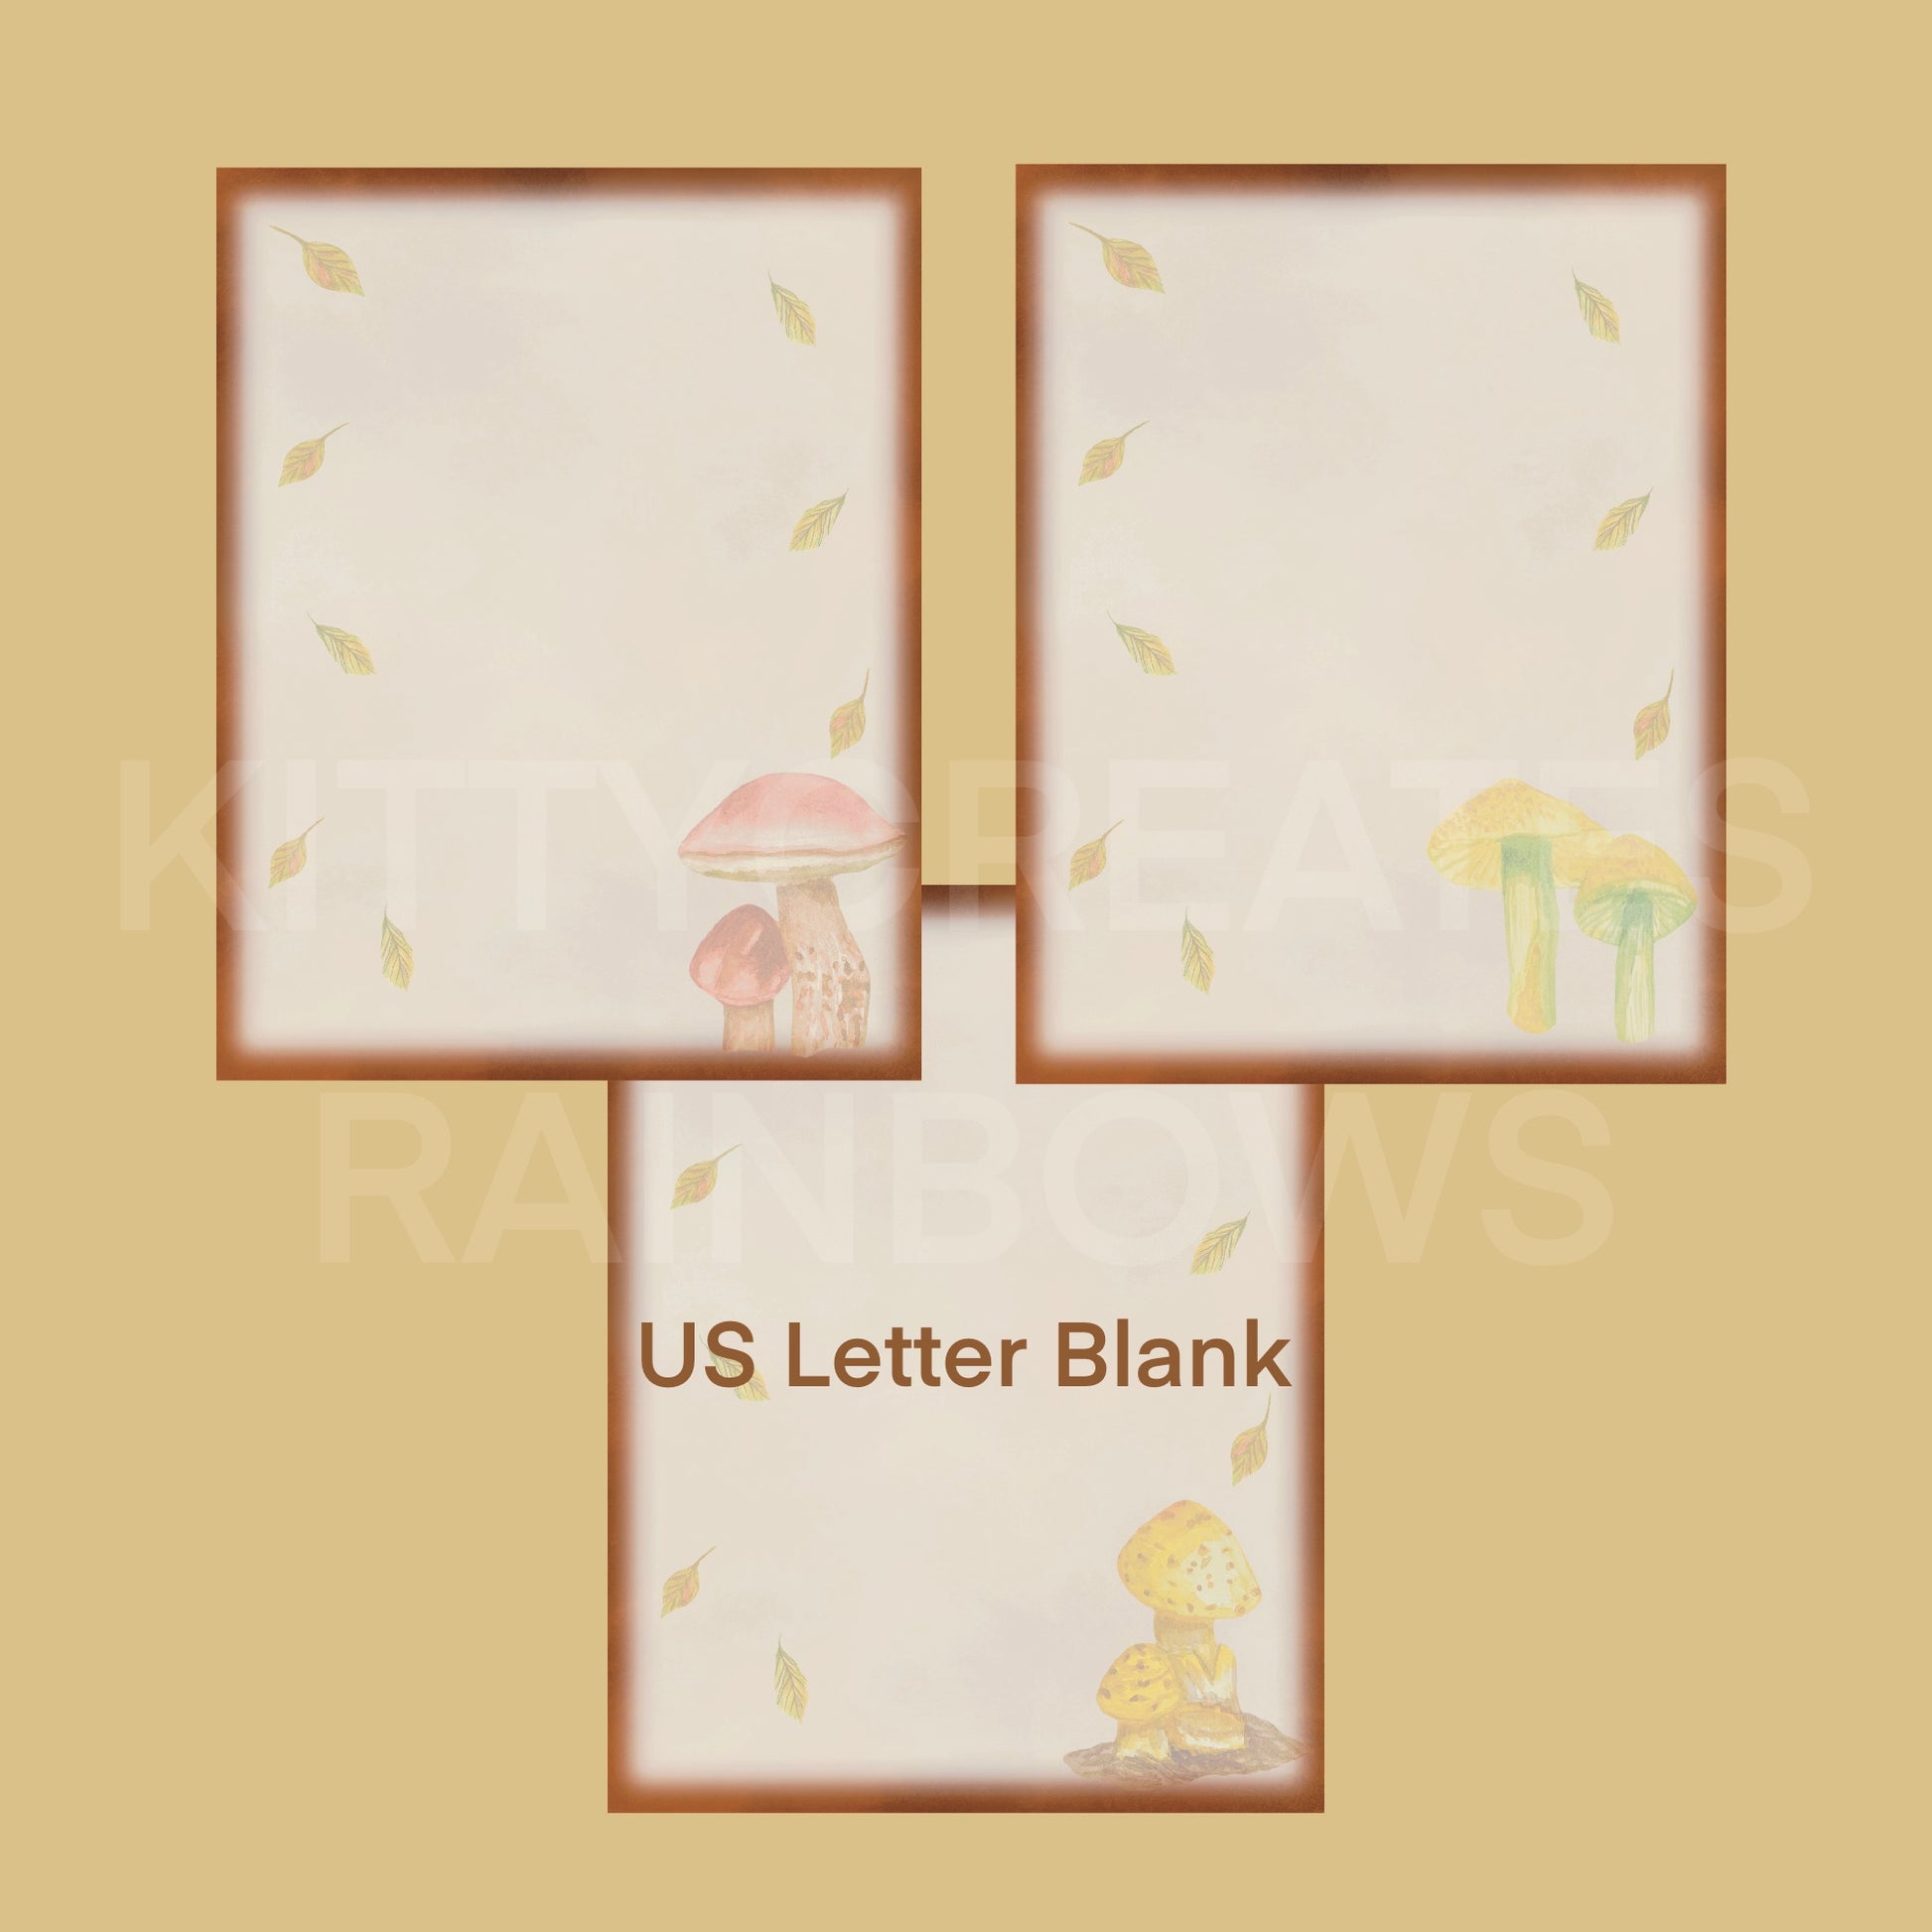 3 images of Fall Forage Mushroom Writing Papers on a light brown yellow background and a white watermark saying Kitty Creates Rainbows. Text on bottom of image also says in brown text US Letter Blank